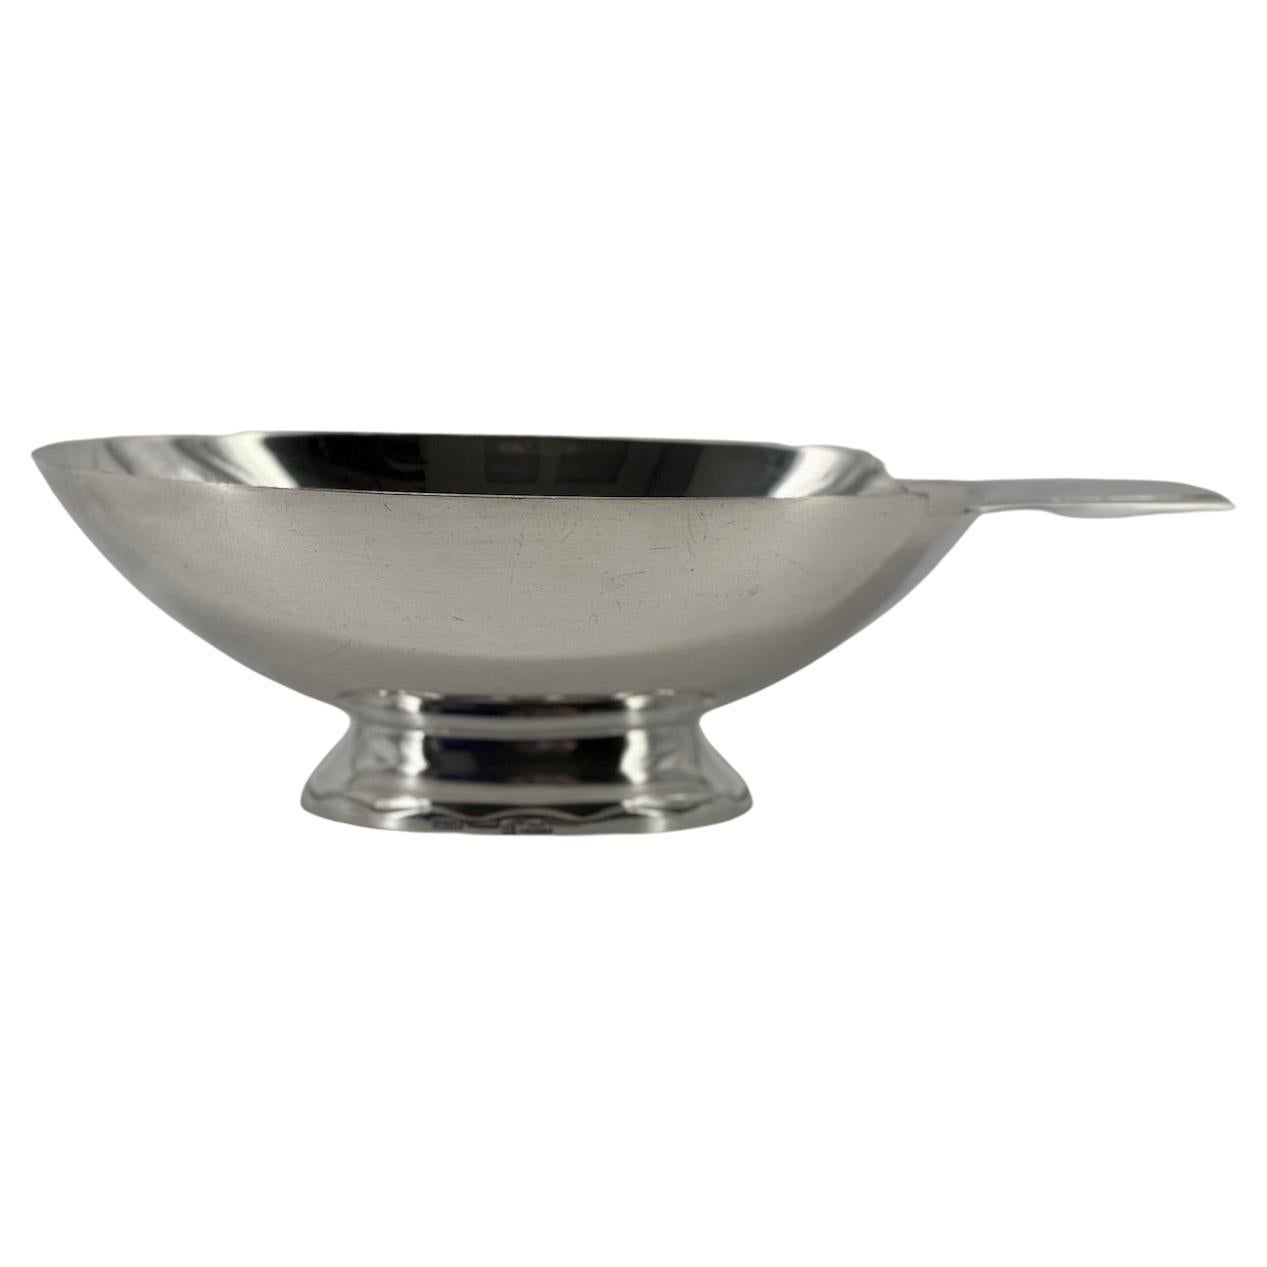 Gallia For Christofle, Silver Plated Gravy Boat ’Swan’ By Christian Fjerdingstad